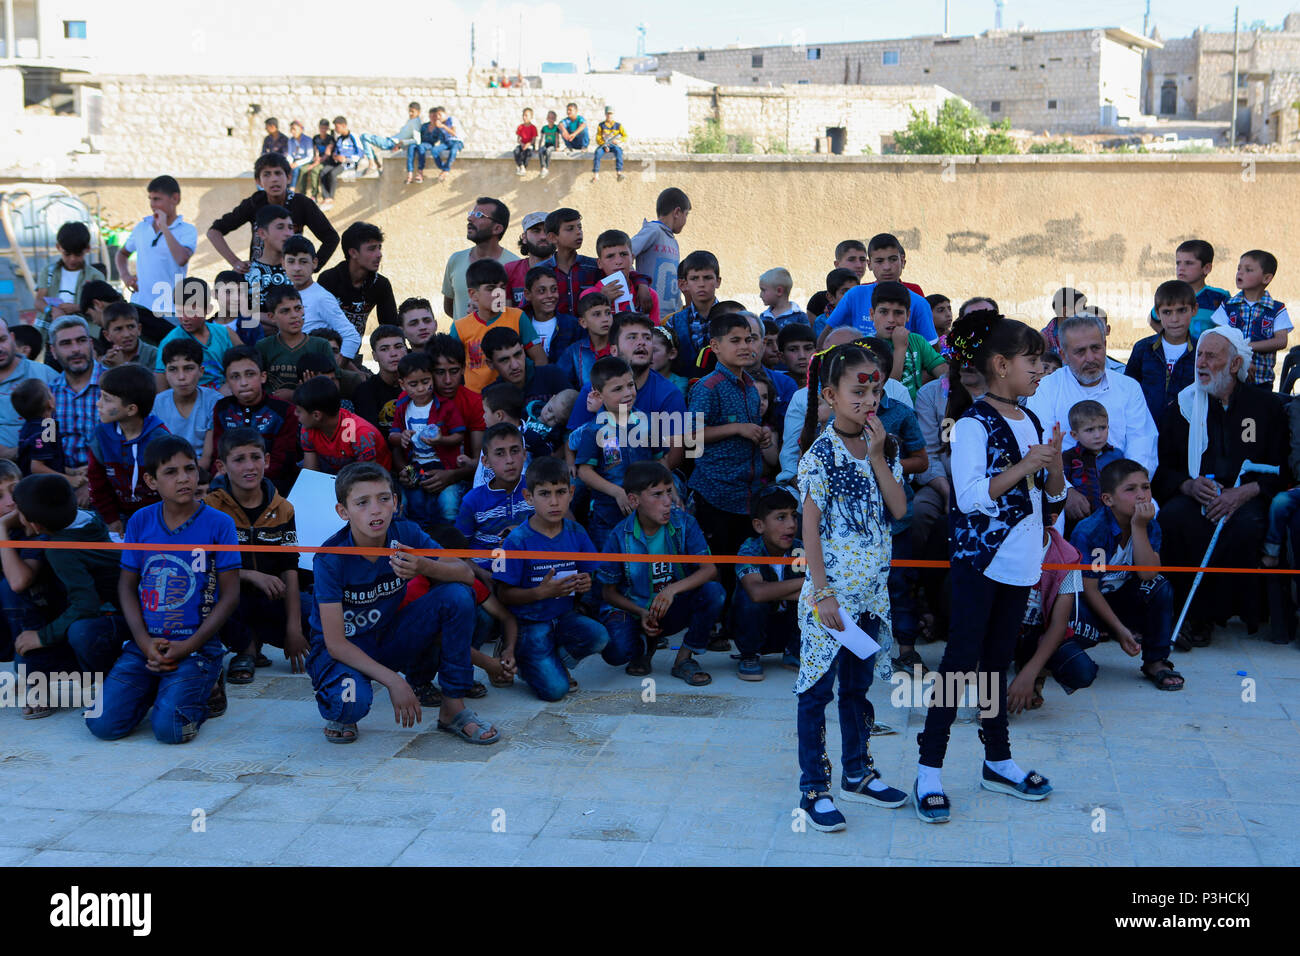 June 17, 2018 - A day of entertainment is held for orphan children in the Syrian town of Taqad, near Aleppo western countryside, on the third day of the Eid Al-Fitr feast. All the orphans of Taqd attended the event, joining a number of playful children activities, and receiving gifts before being given dinner Credit: Juma Mohammad/IMAGESLIVE/ZUMA Wire/Alamy Live News Stock Photo